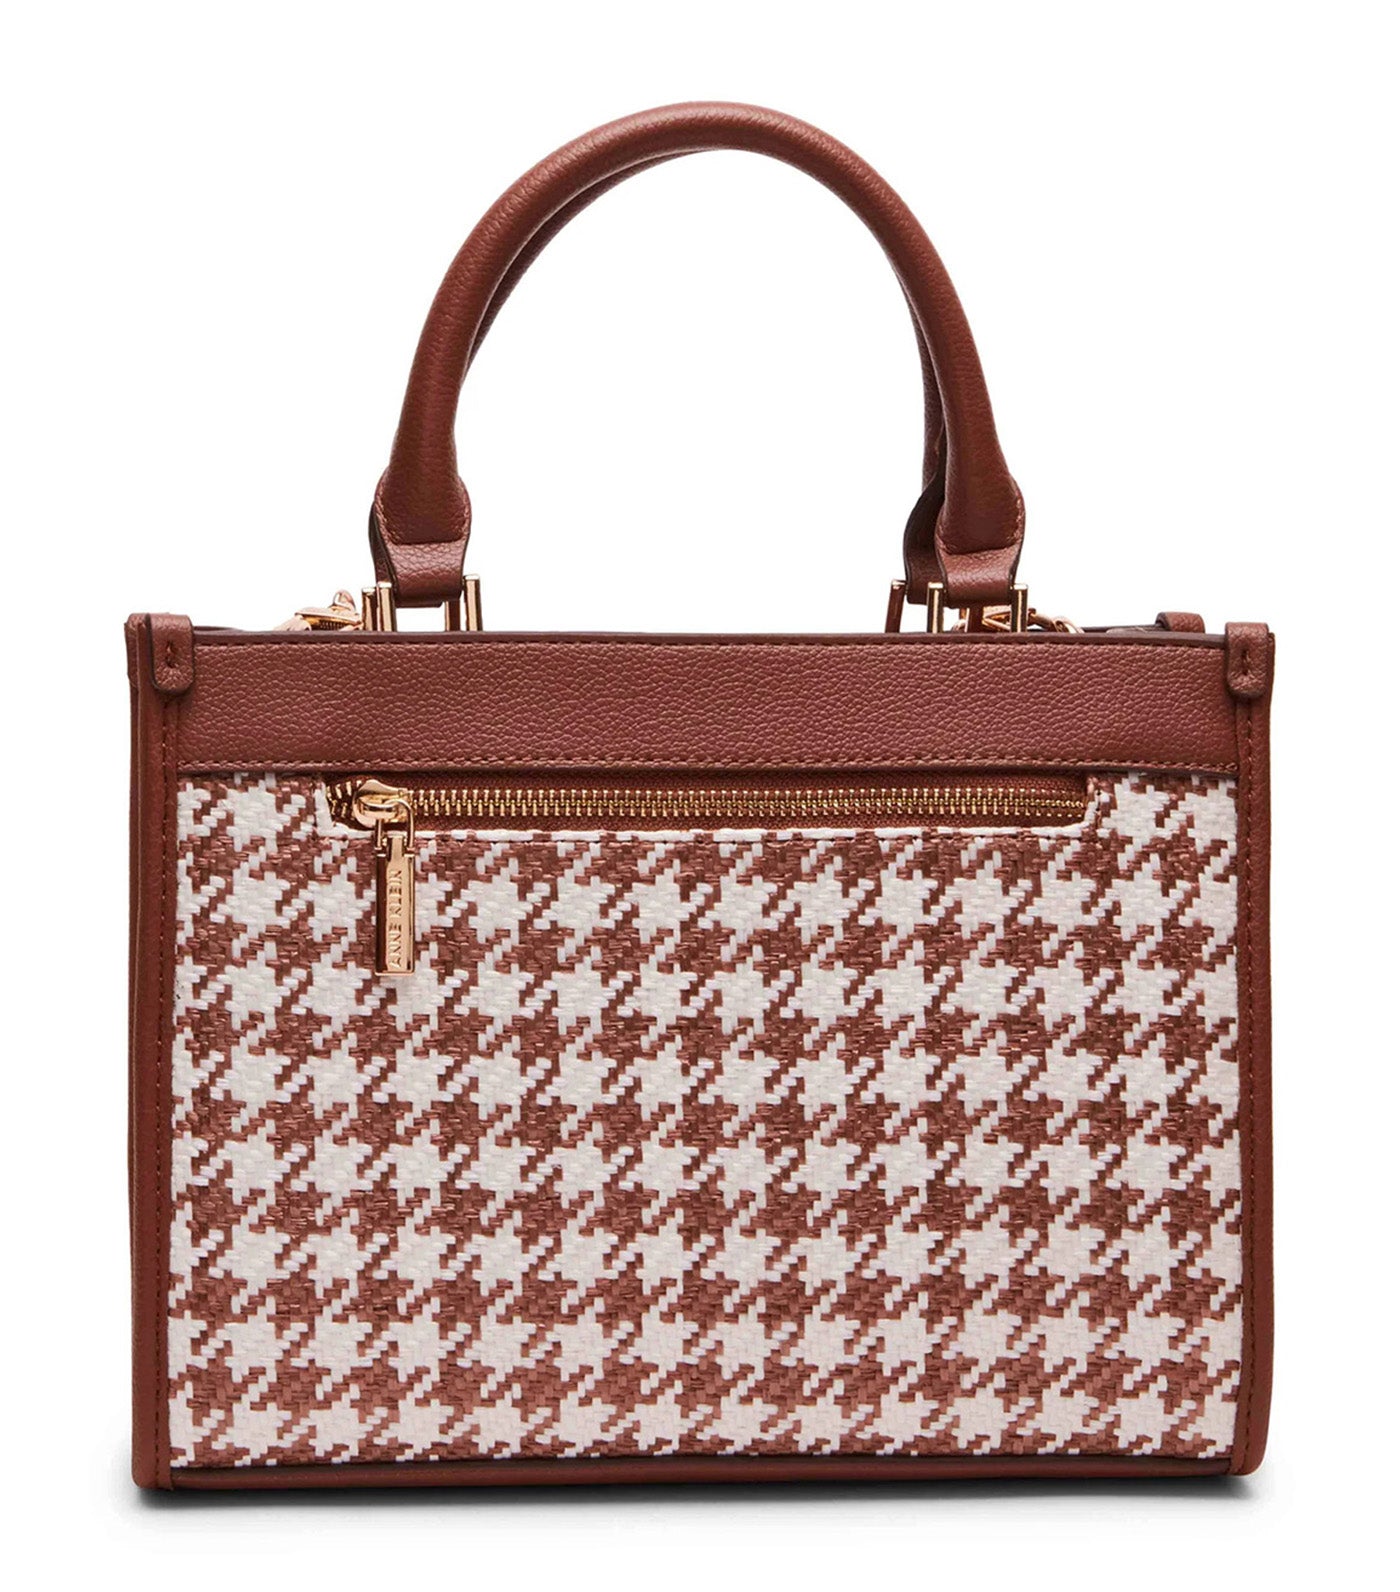 Mini Tote with Chain Swag in Woven Houndstooth Chestnut